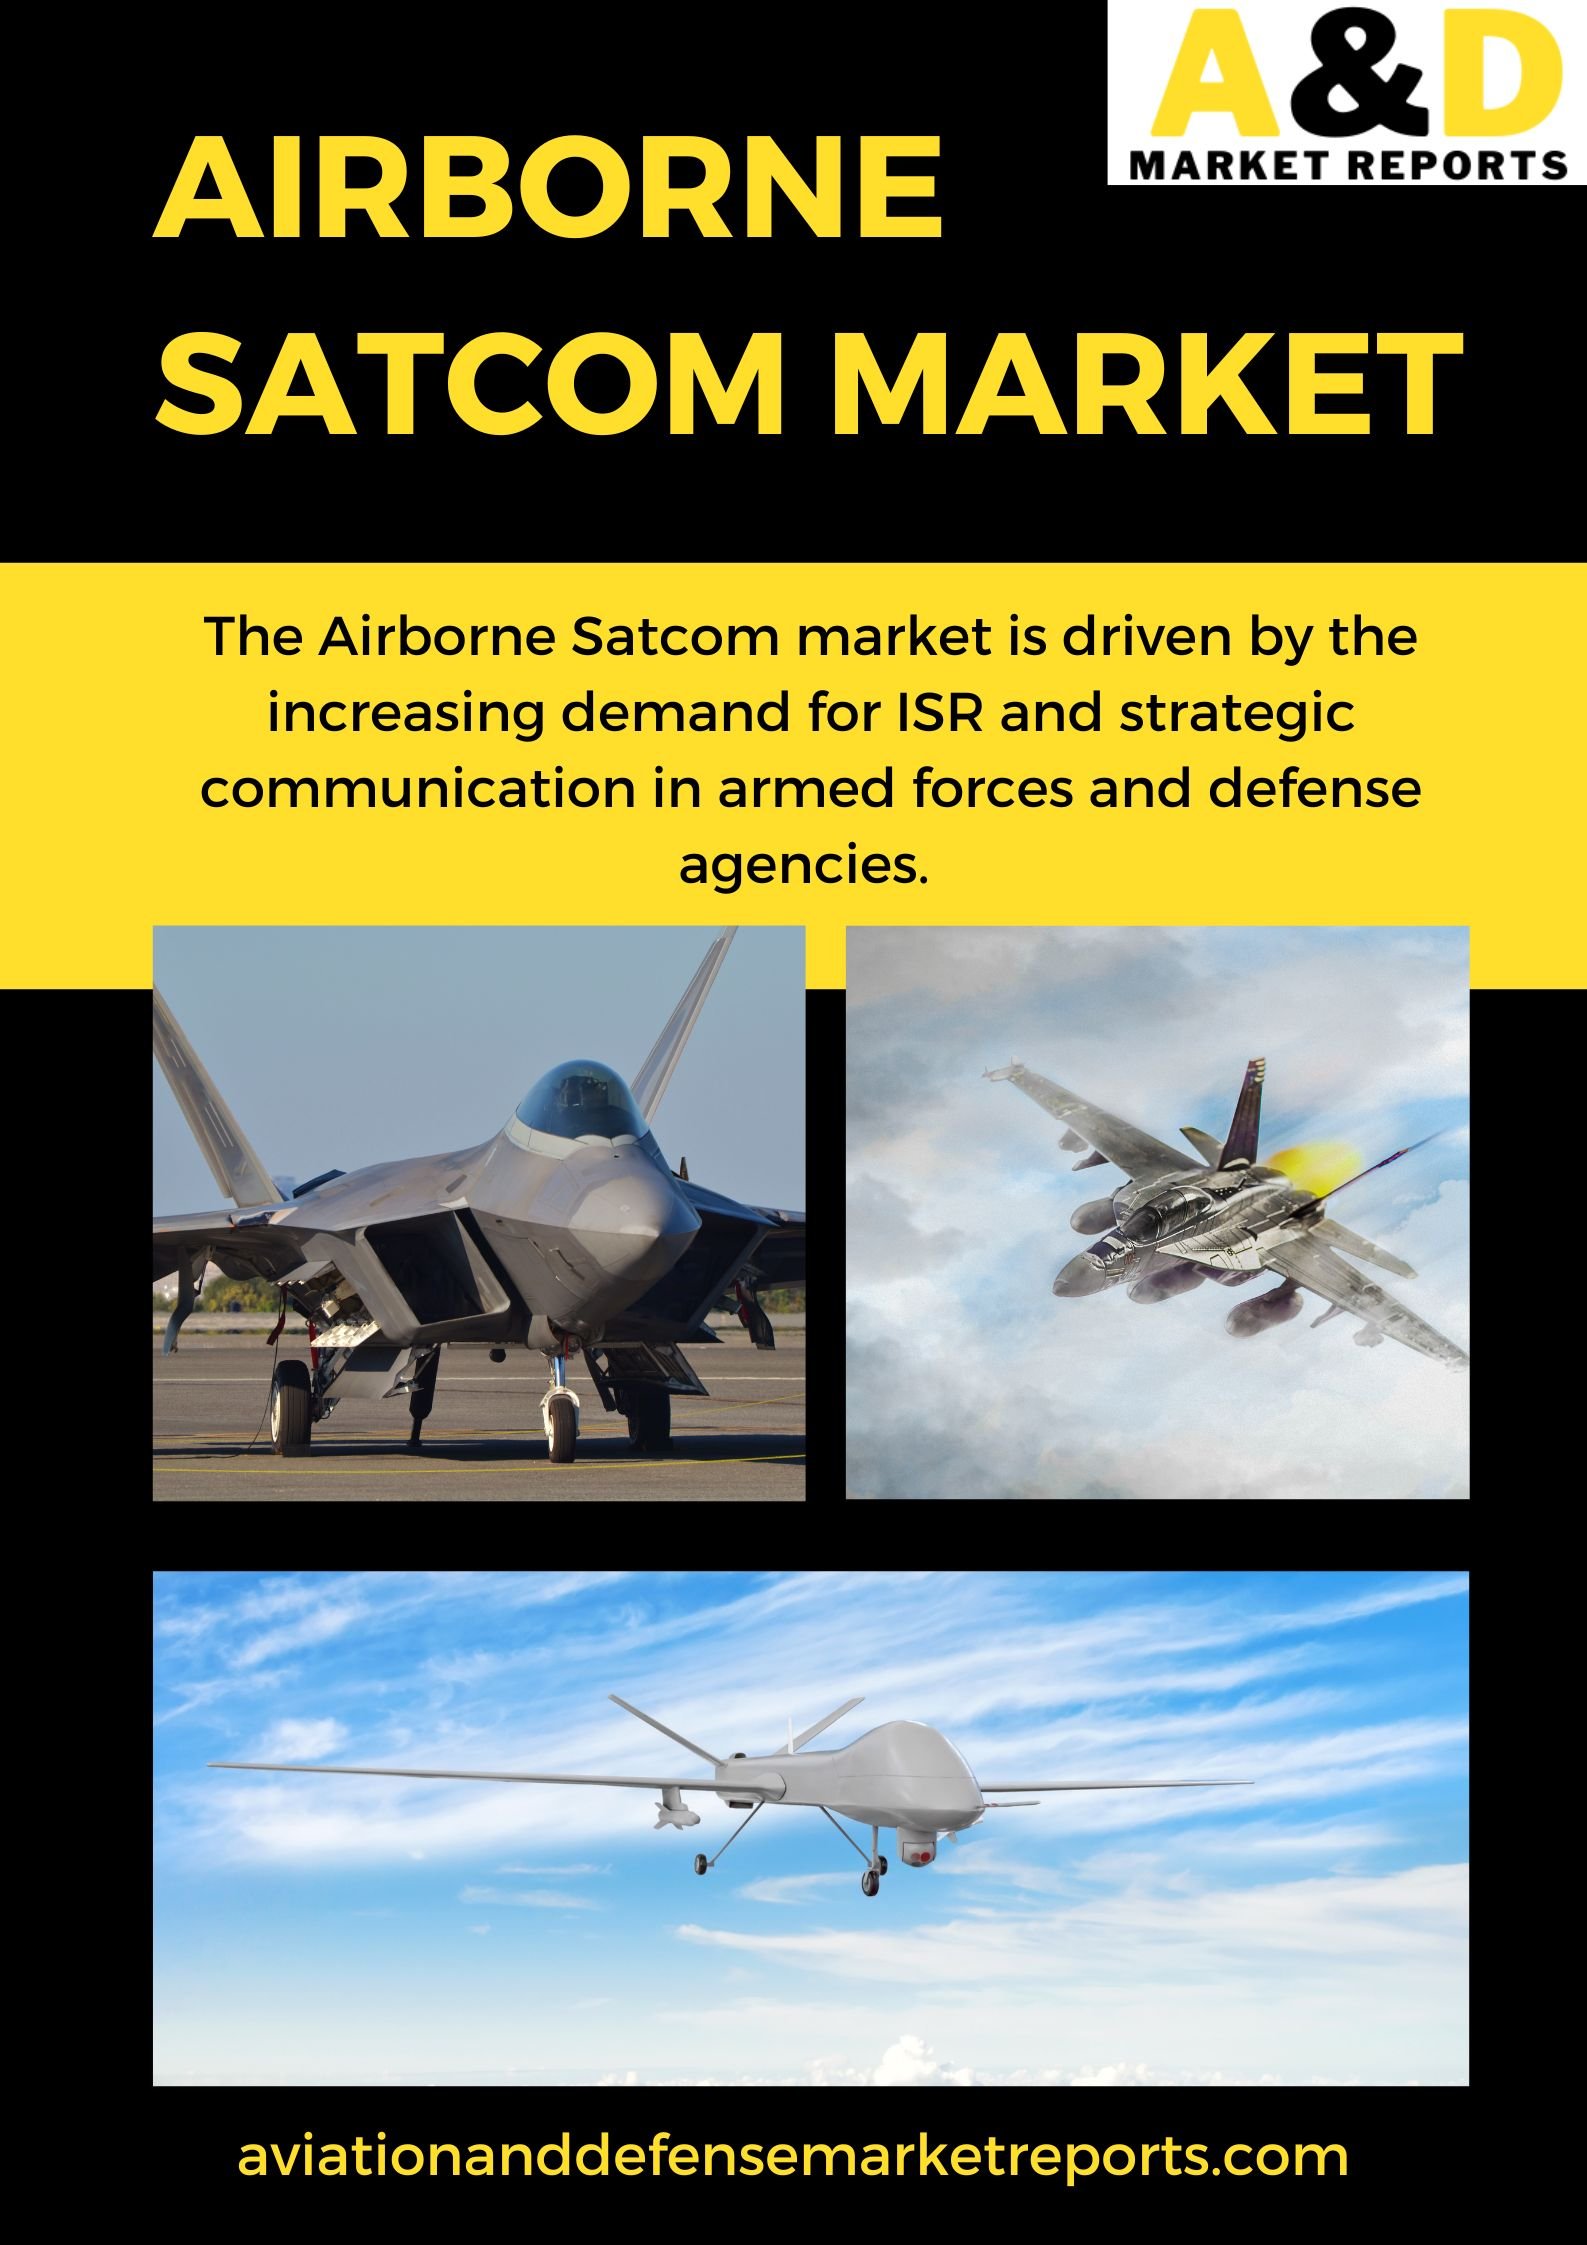 Proliferation of UAVs will Generate Demand for Airborne SATCOM Systems